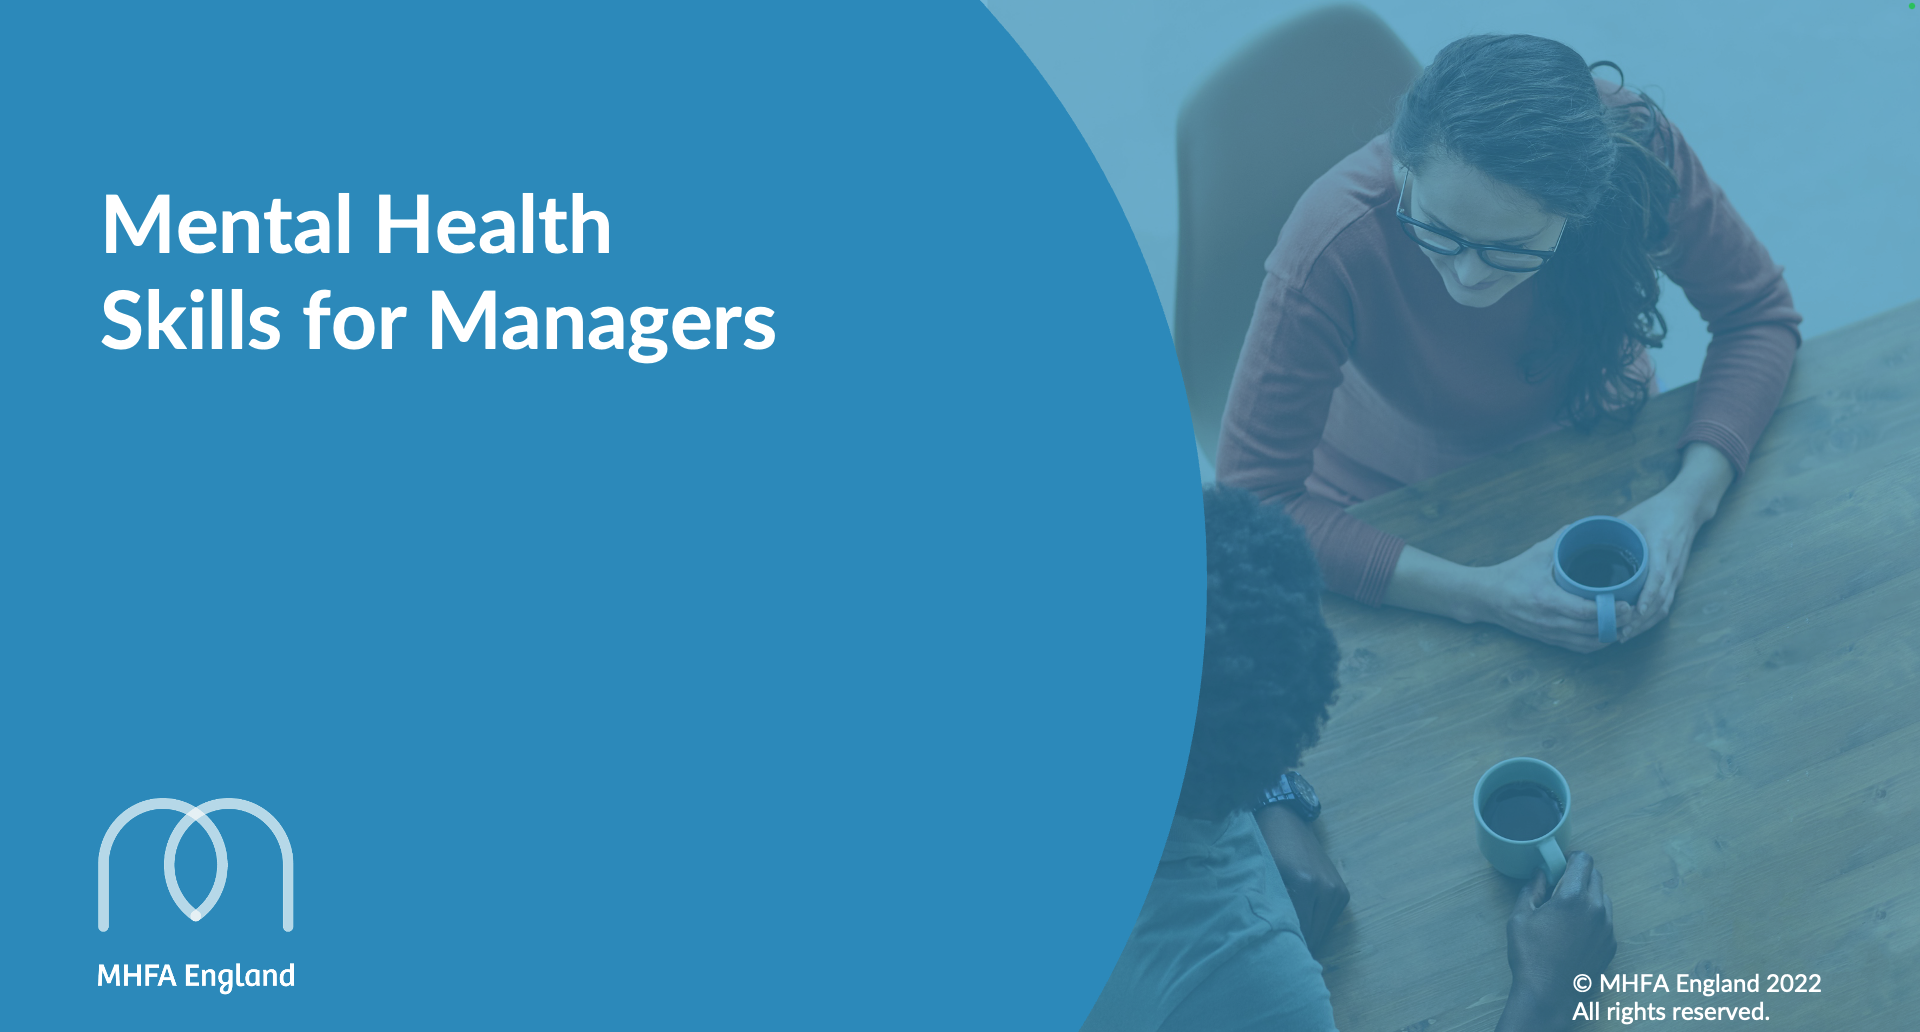 Mental Health Skills for Managers